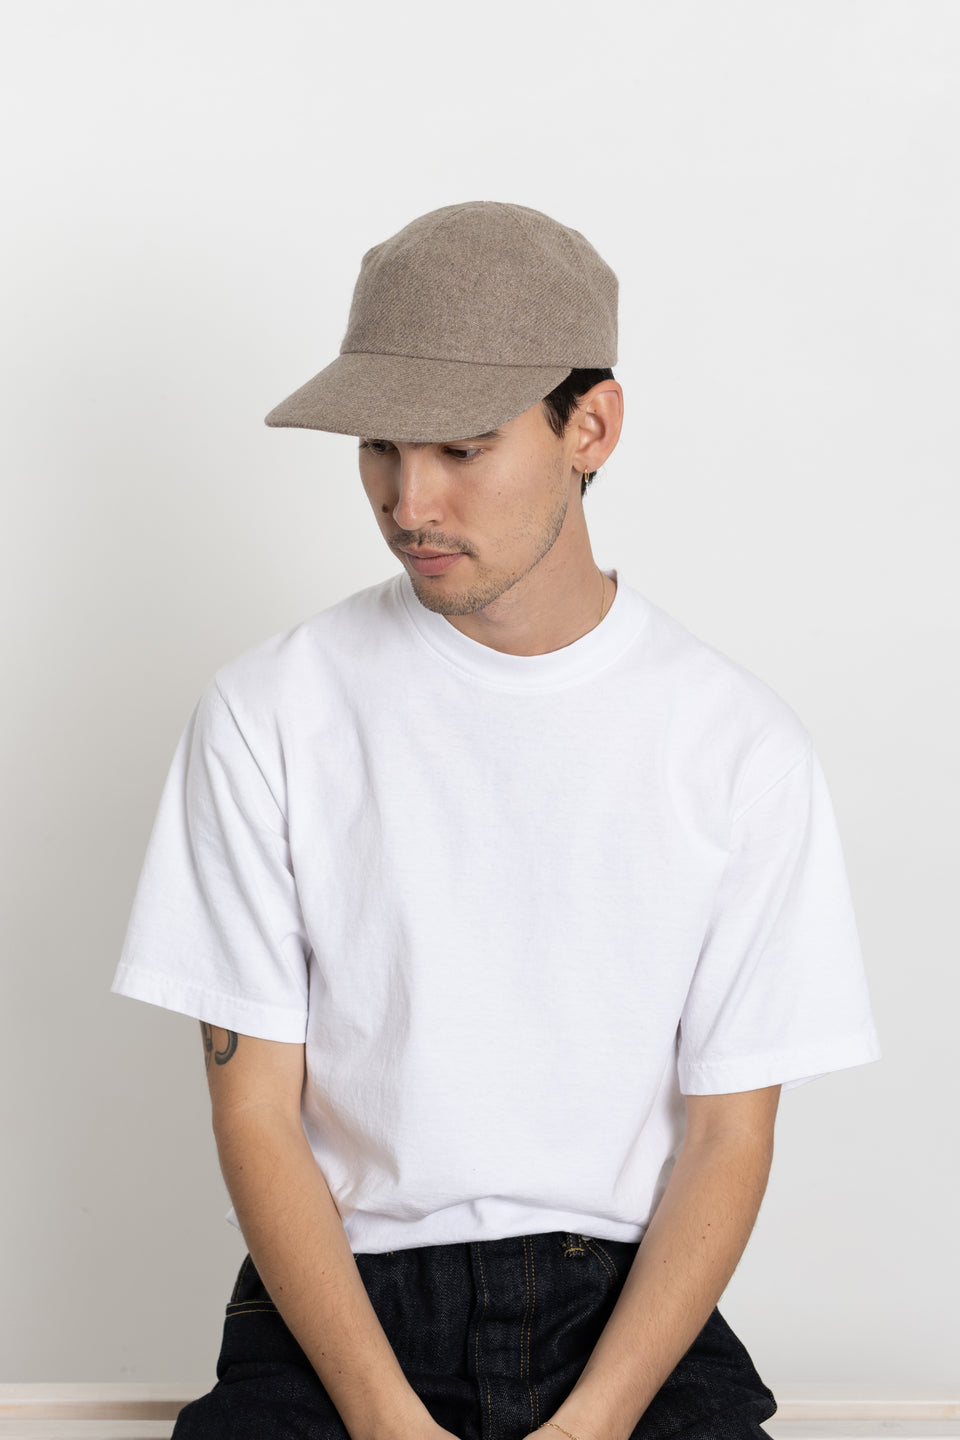 Found Feather Made in Japan Men's Collection FW23 1 Panel Cap Mélange Wool Beige Calculus Victoria BC Canada